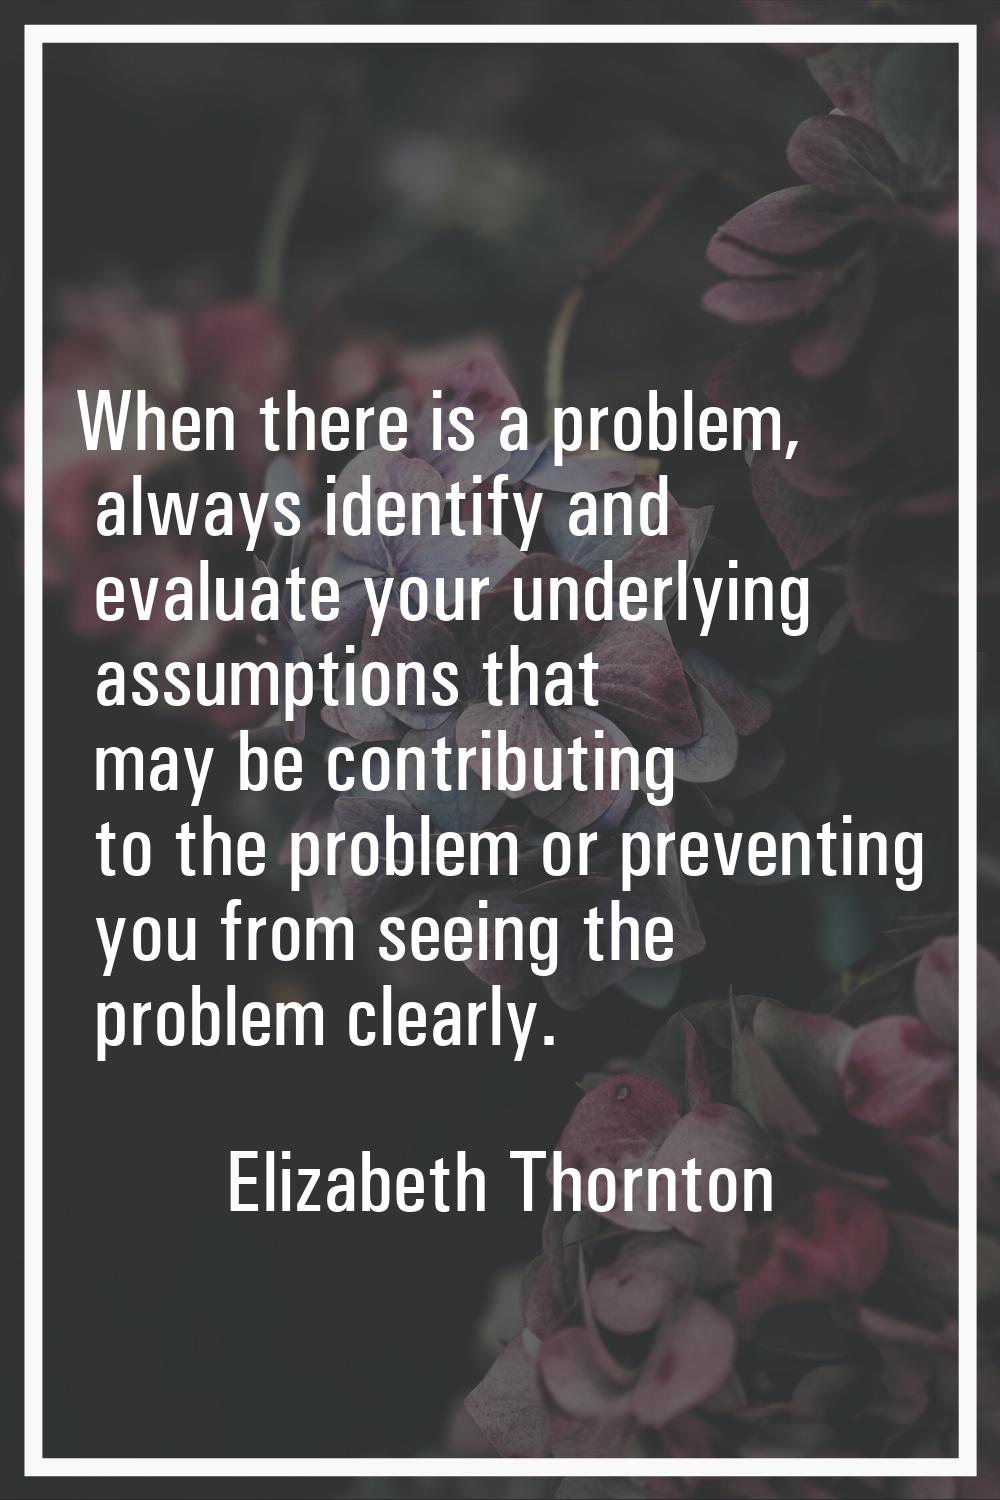 When there is a problem, always identify and evaluate your underlying assumptions that may be contr